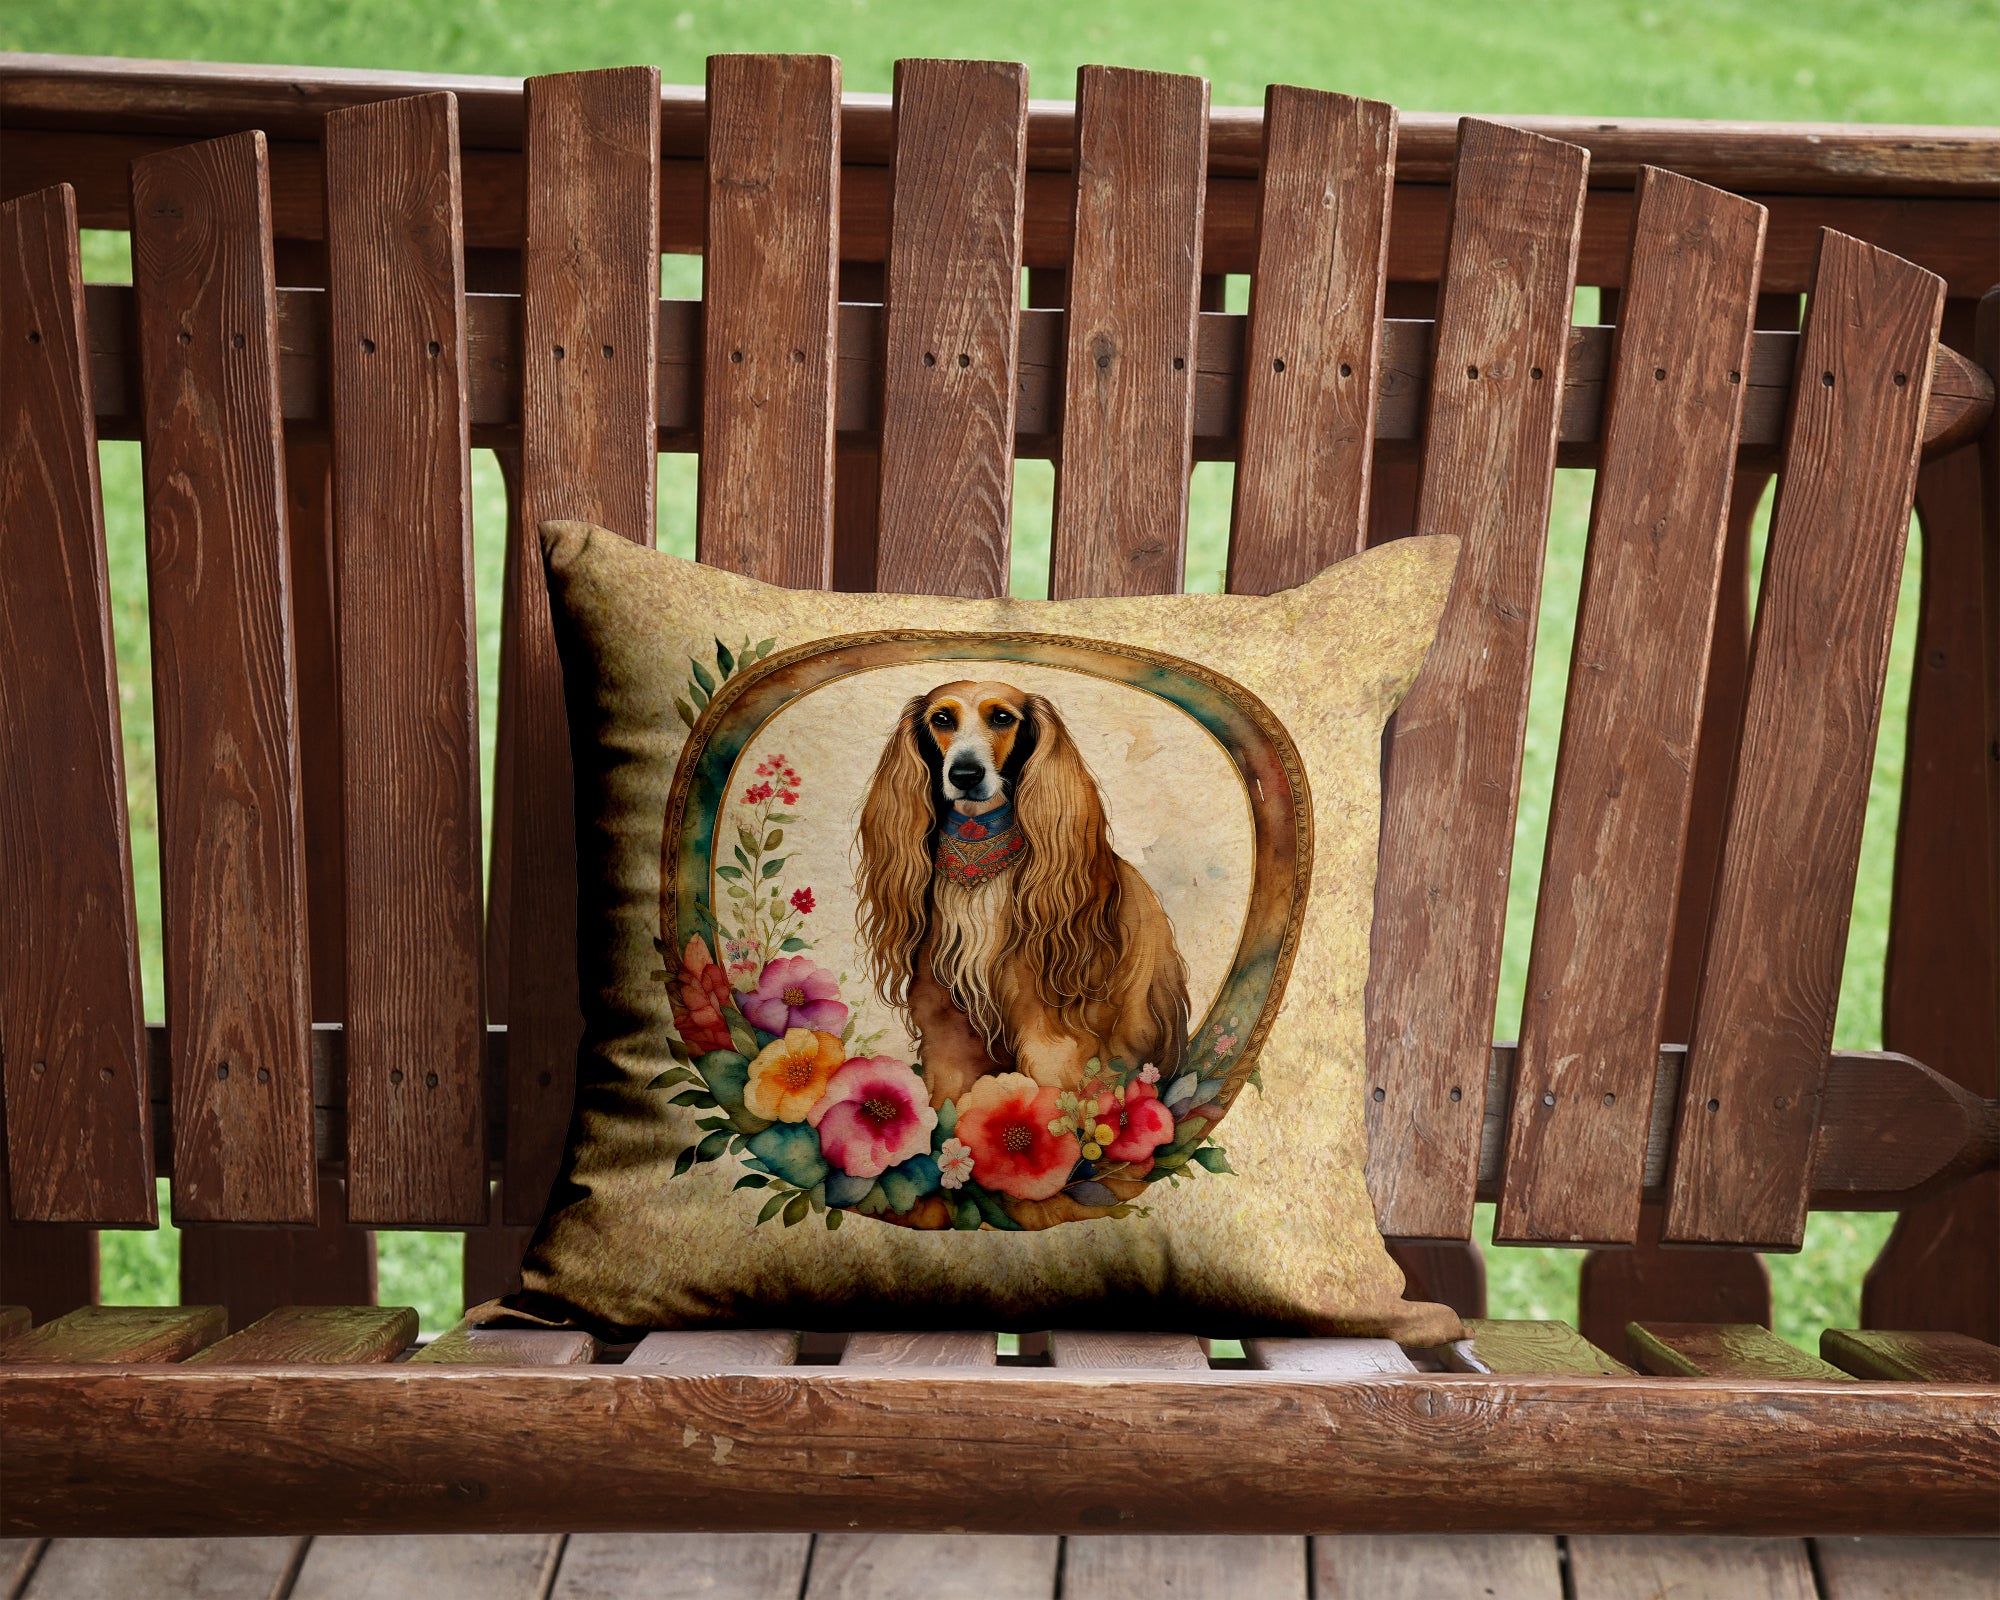 Afghan Hound and Flowers Fabric Decorative Pillow